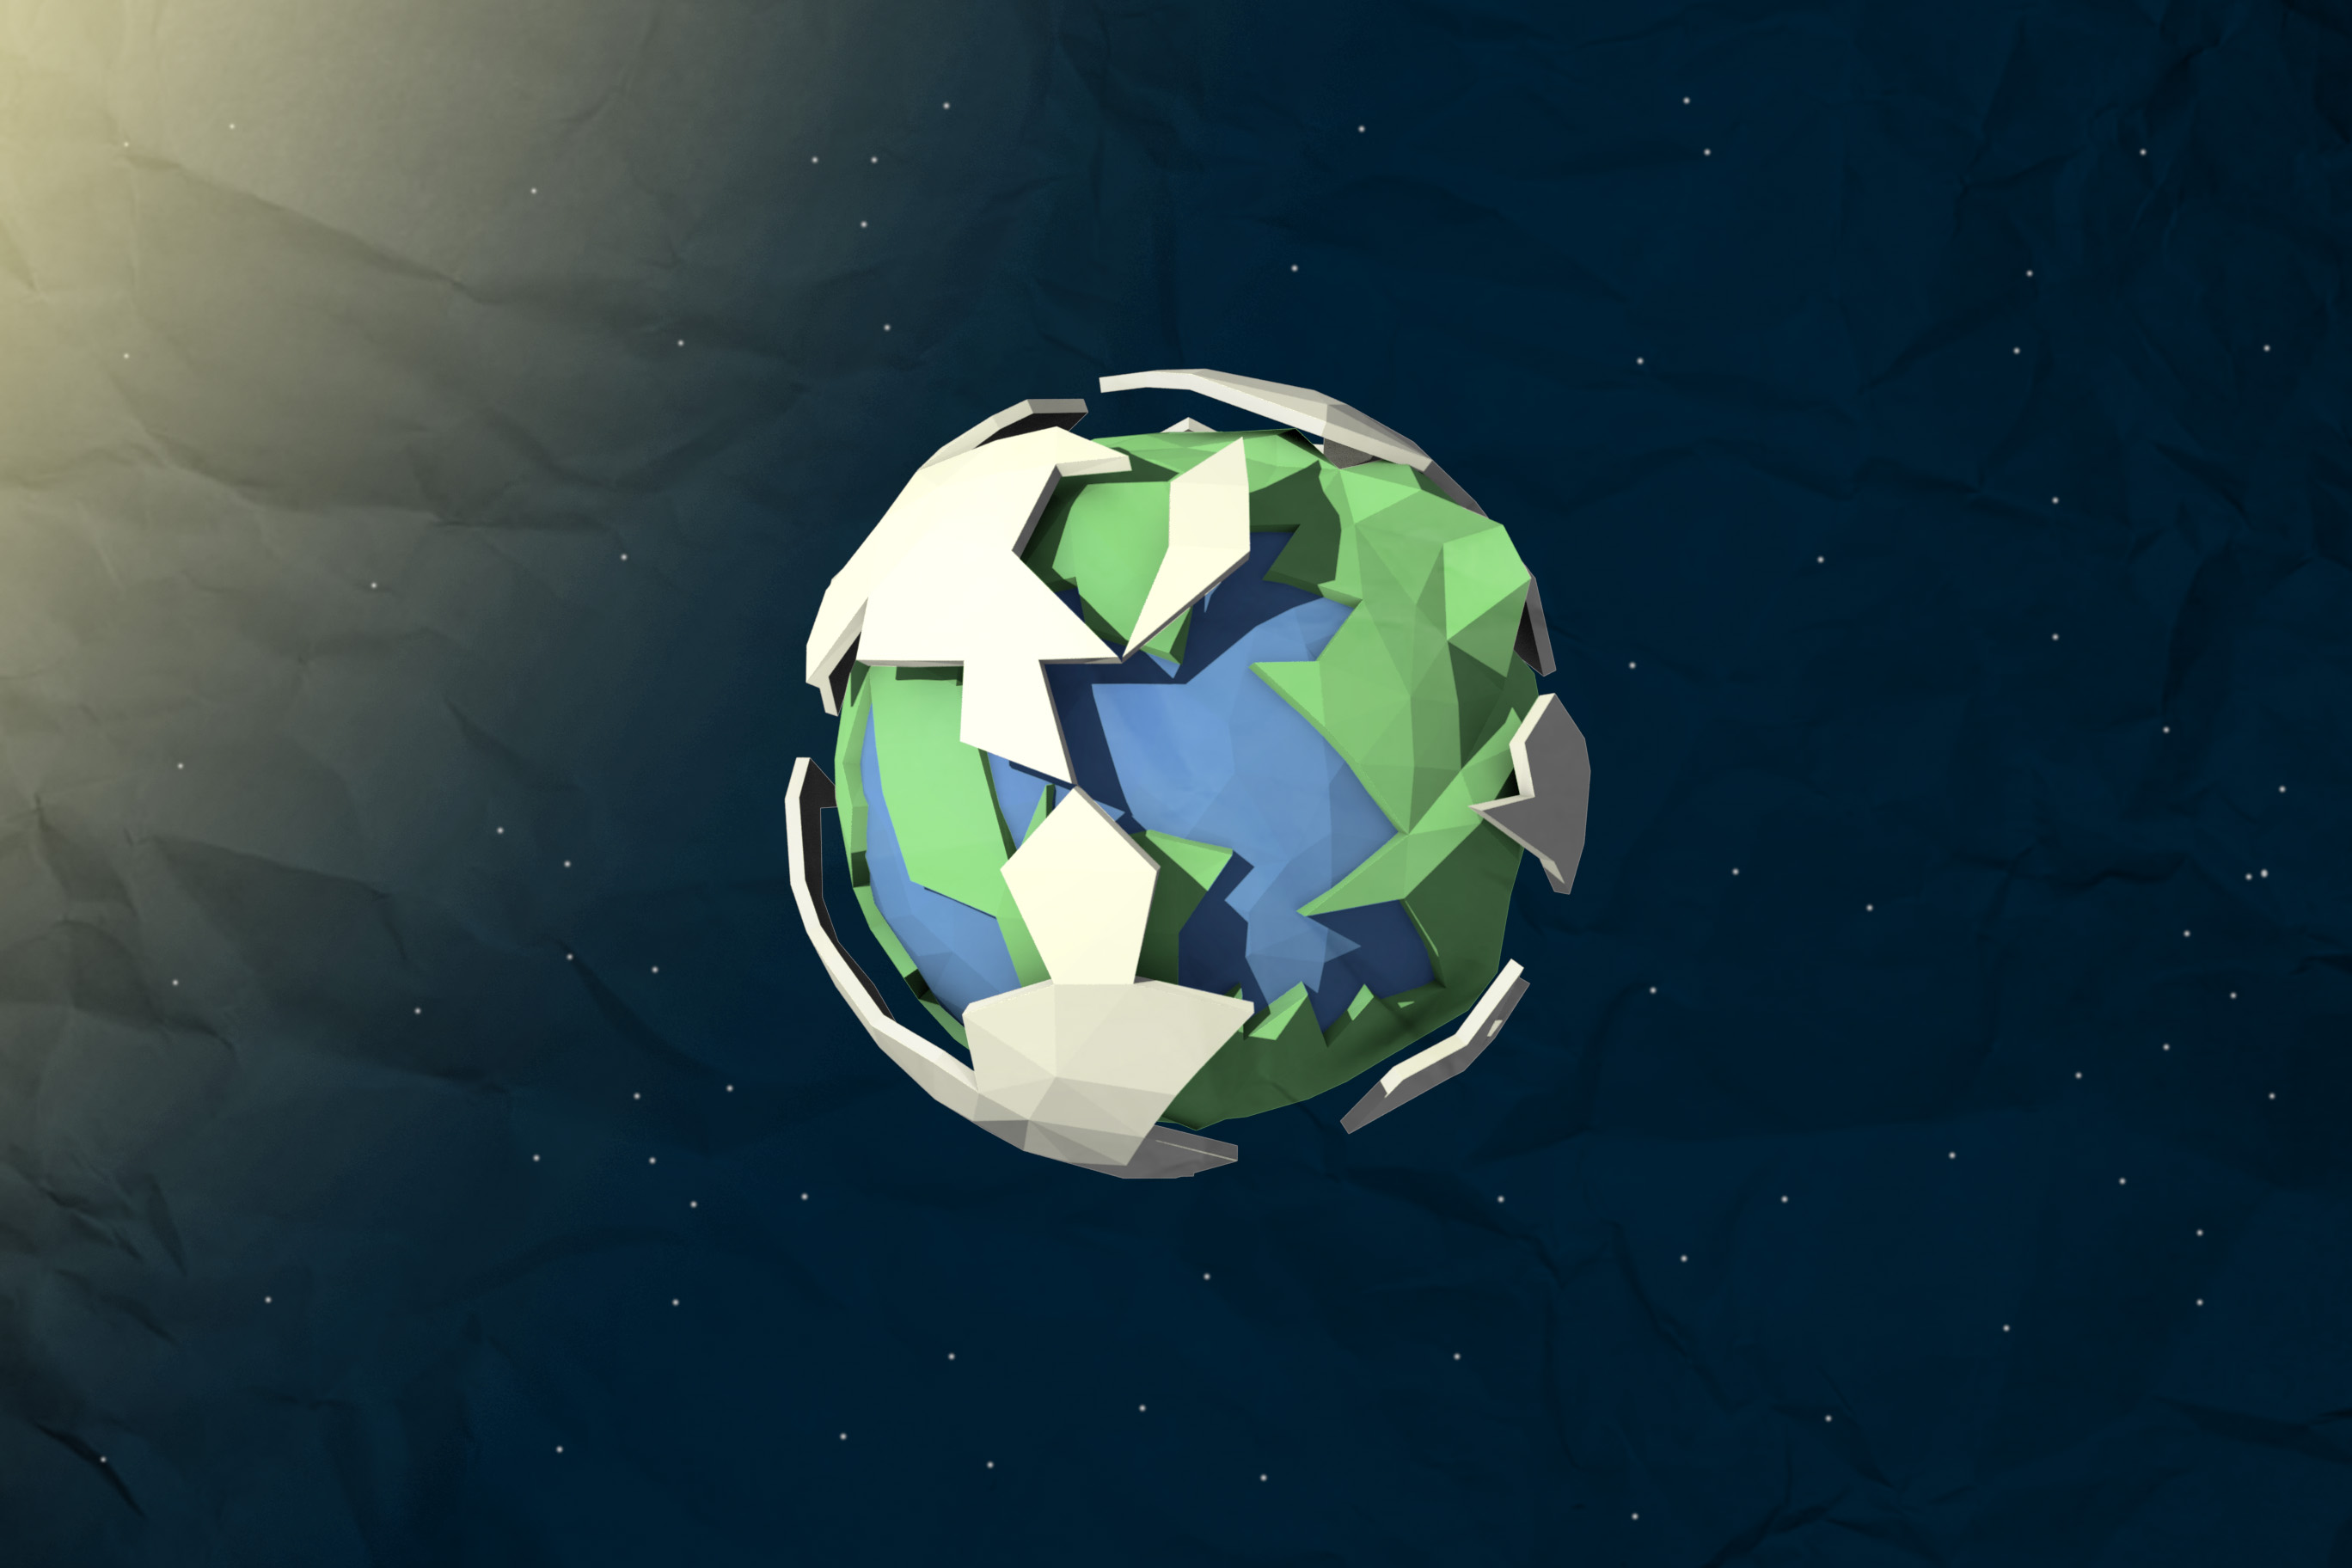 A low-poly 3D model of Earth in outer space